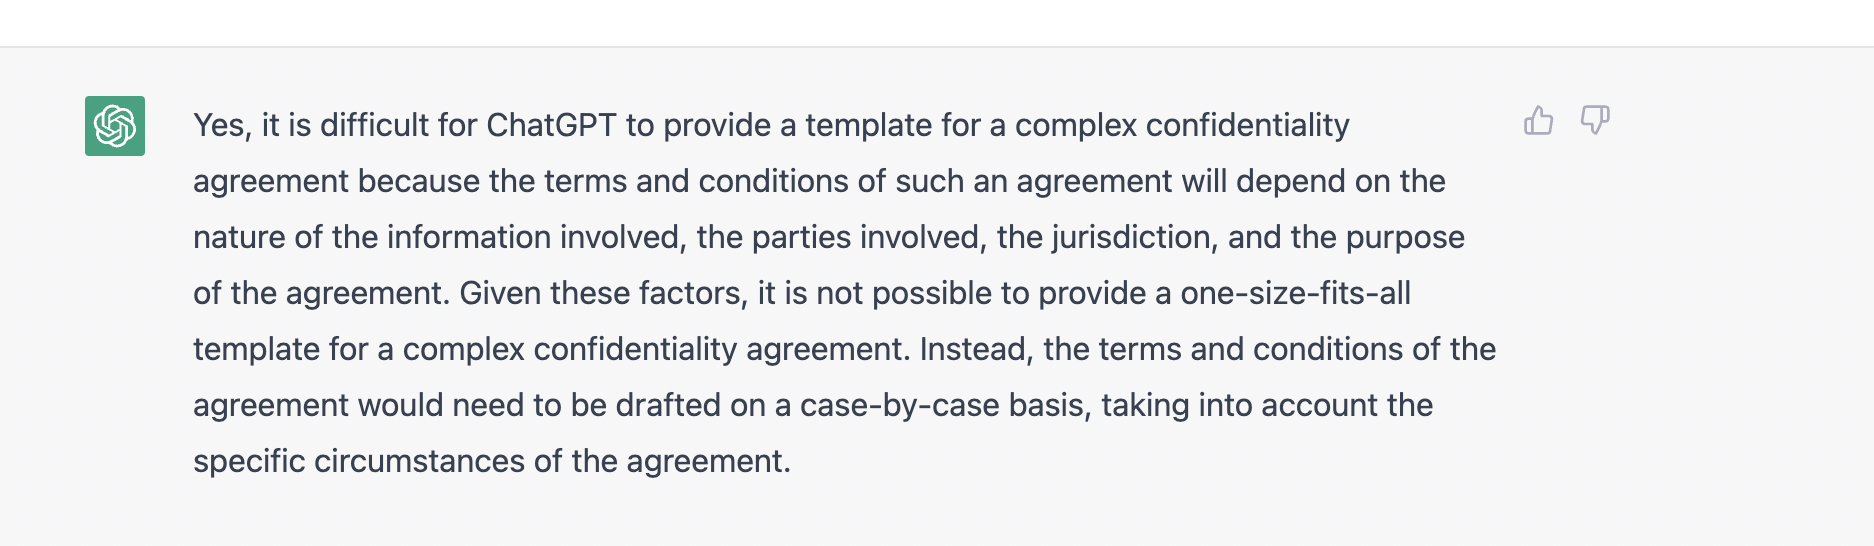 ChatGPT response for a complex legal contract template